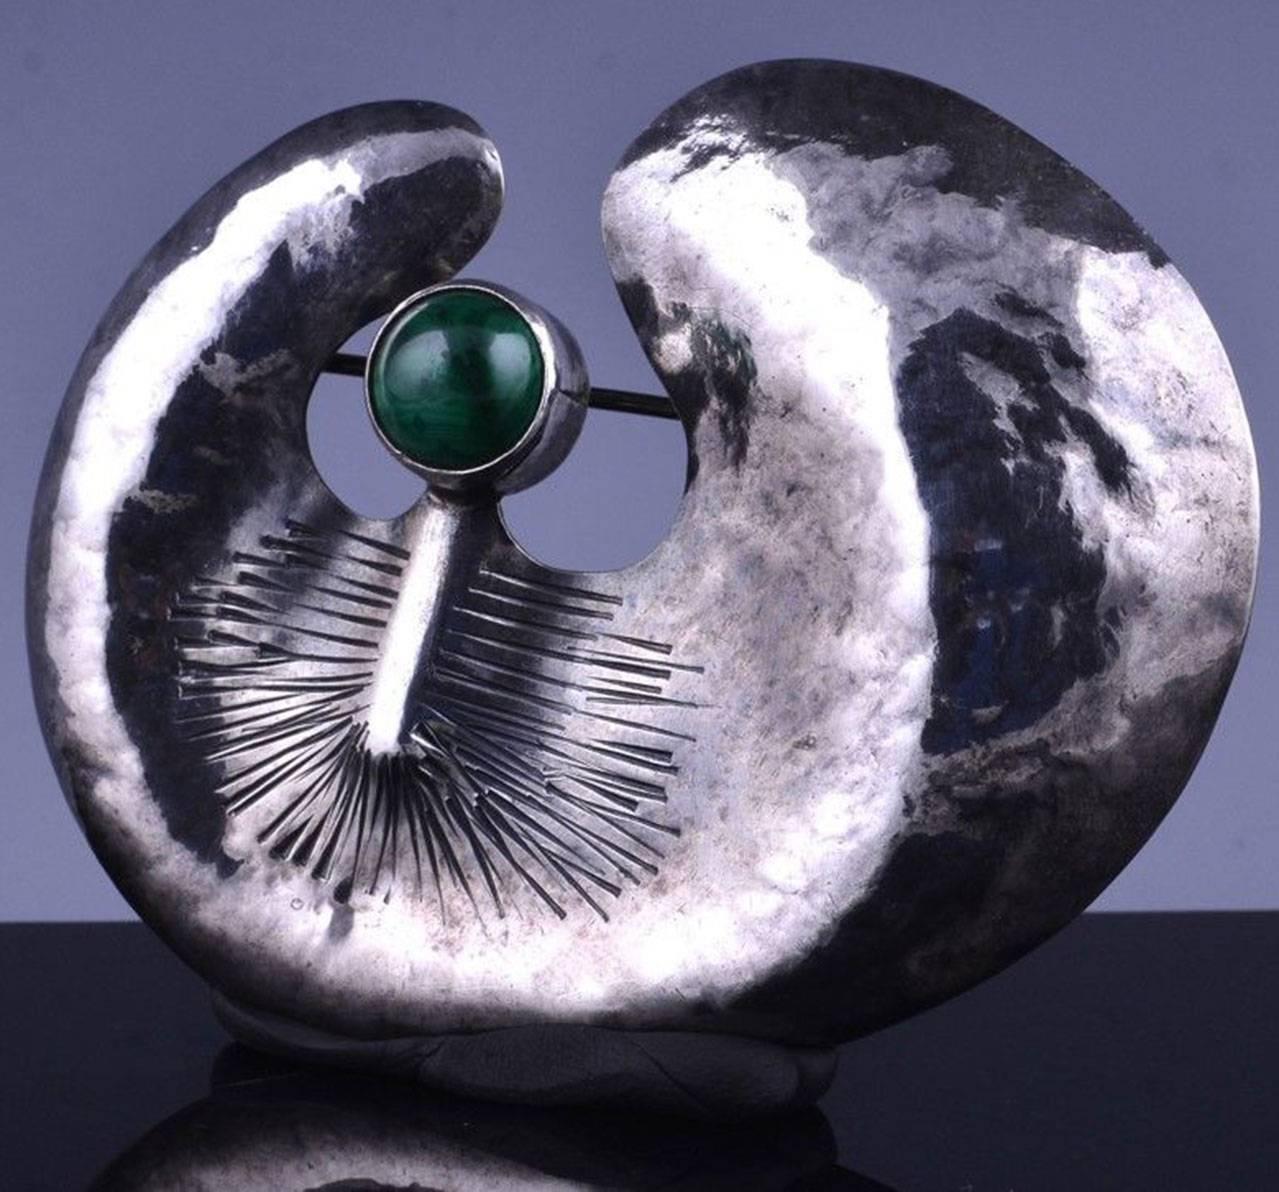 Amazing large Modernist hand crafted and hand-hammered Runway brooch set with a malachite cabochon stone. Hallmarks correspond to Poland 925 along with a maker’s mark. Approx. size:  2.88 inches wide x 2.38 inches high; approx. Chic and